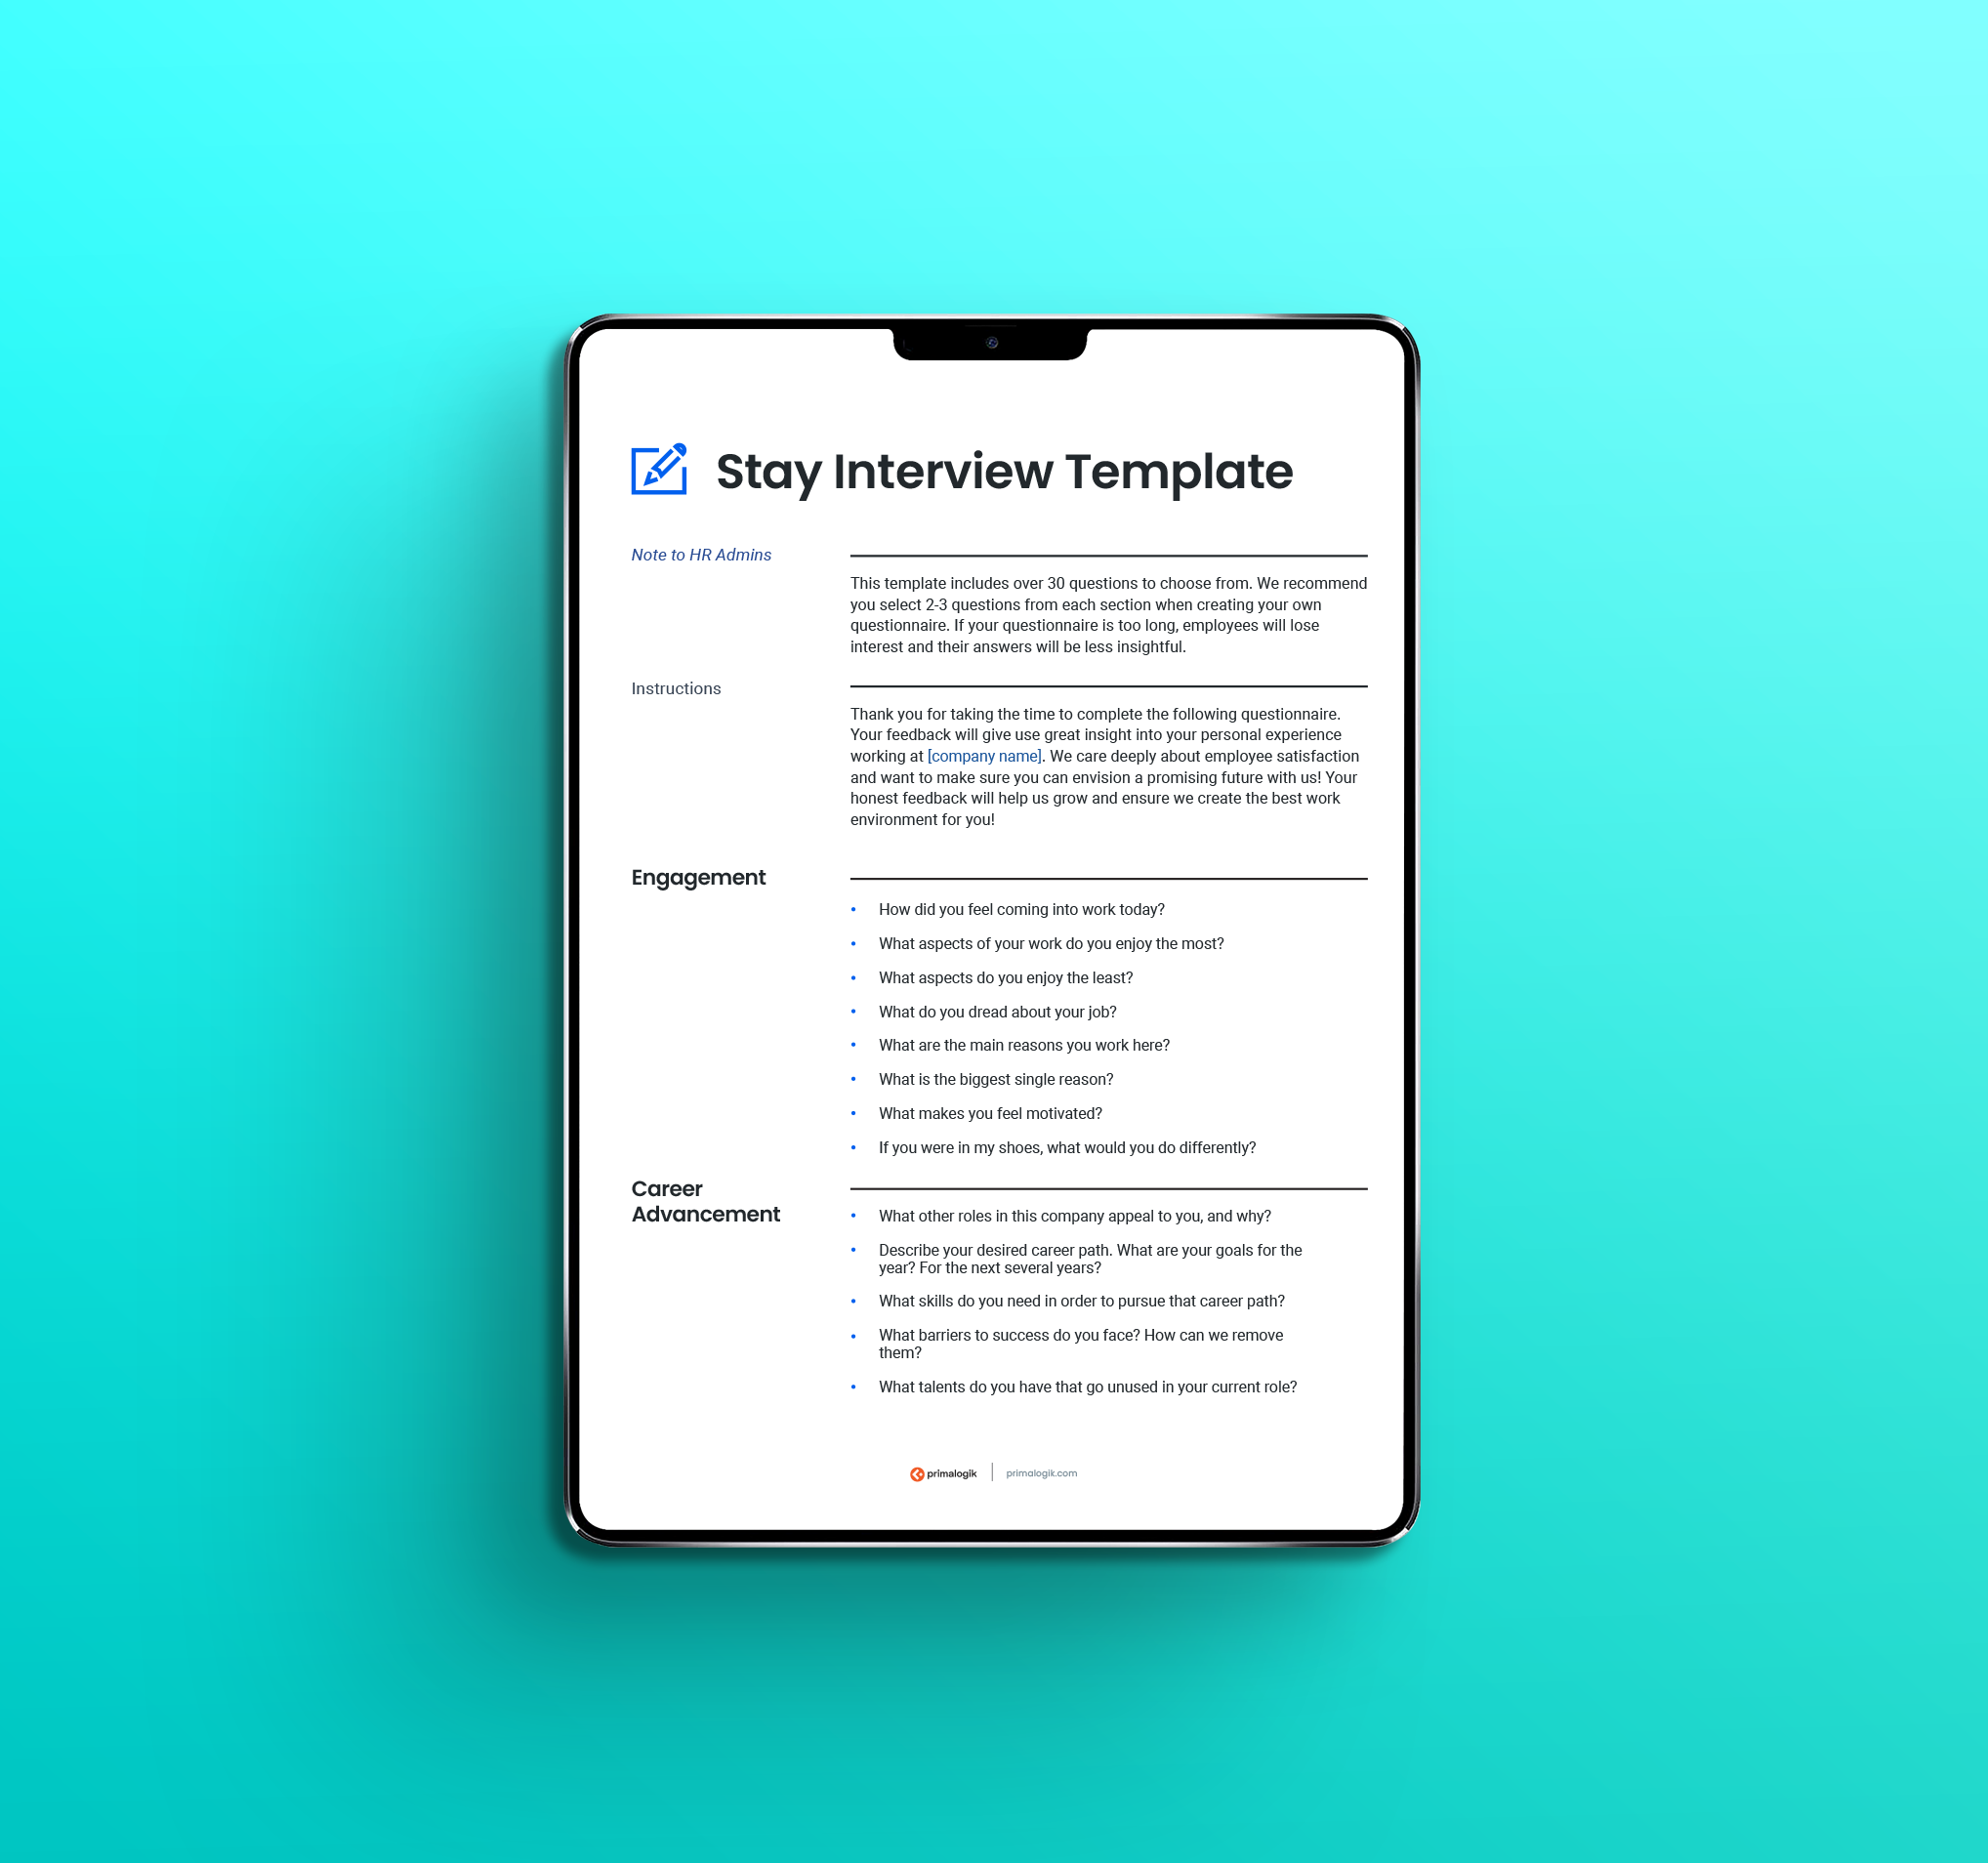 A tablet displaying Stay Interview Template